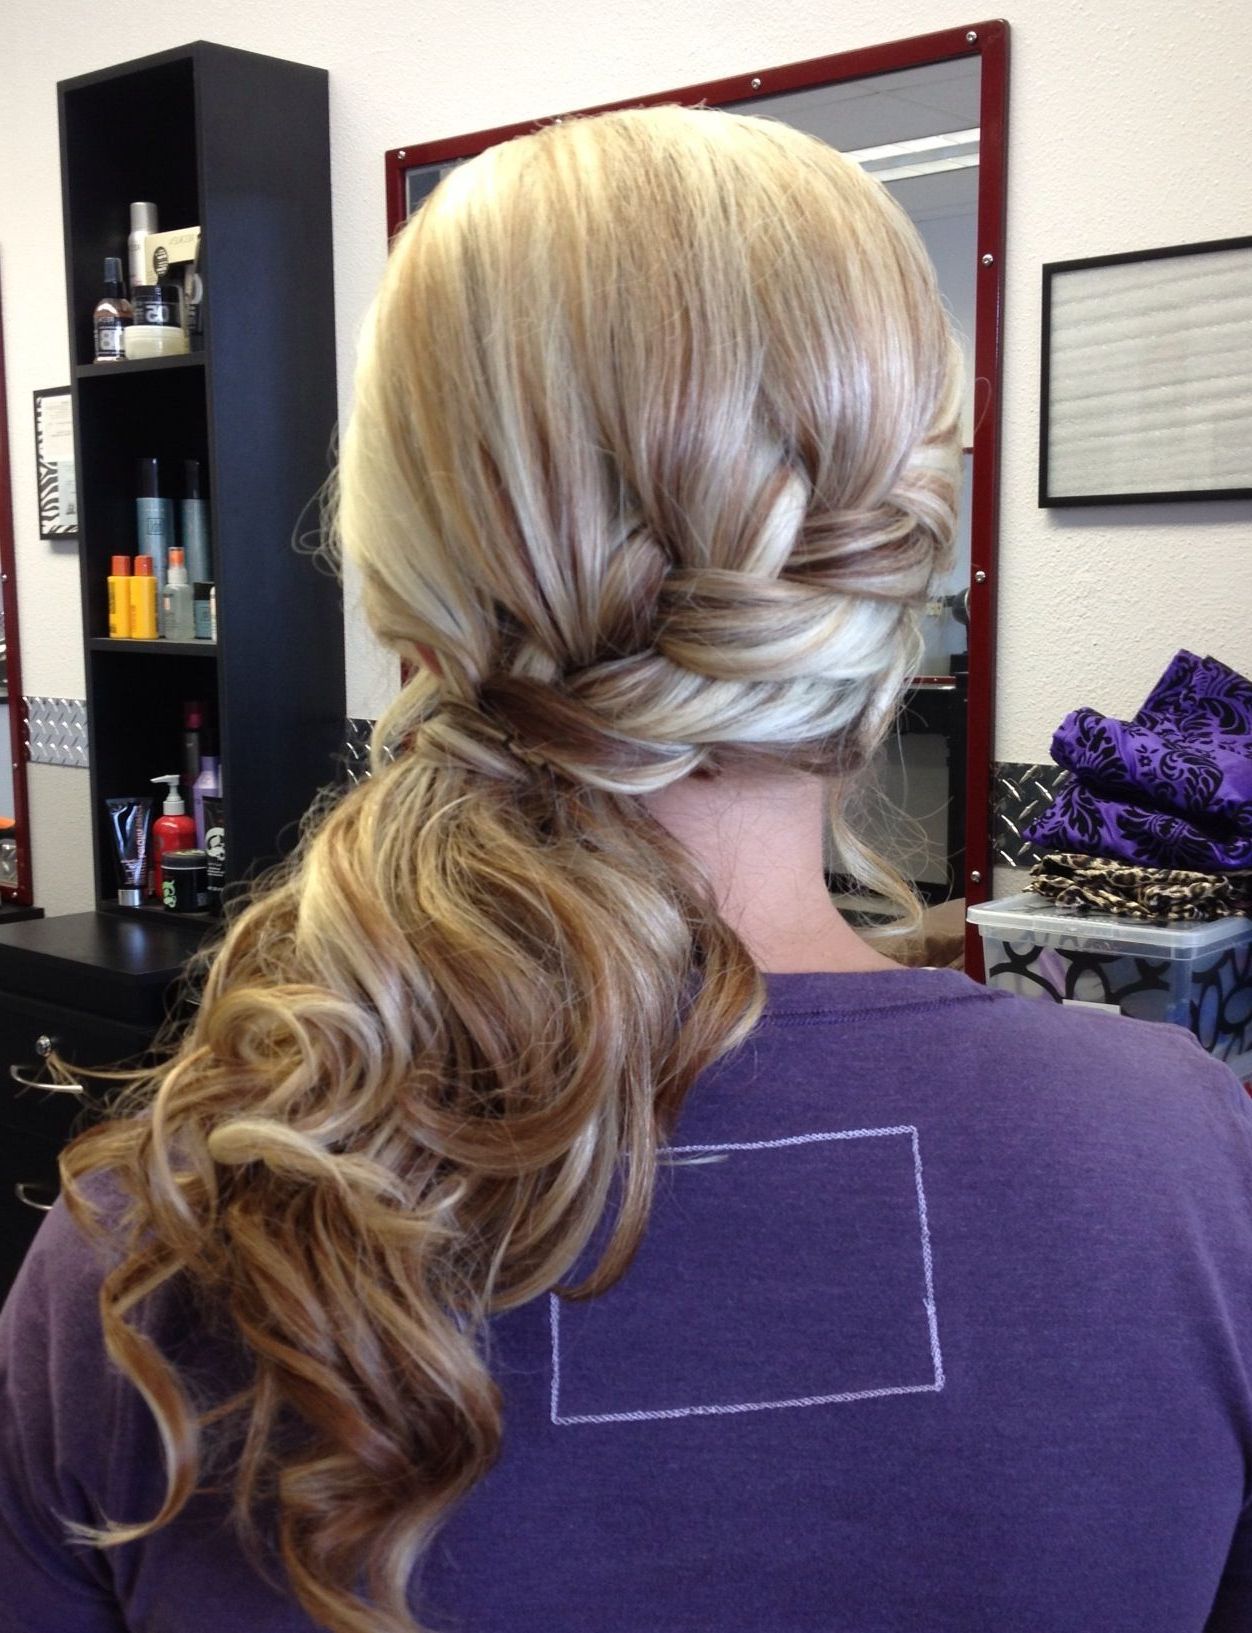 Pin On Hair! Pertaining To 2020 Romantic Ponytail Updo Hairstyles (View 11 of 20)